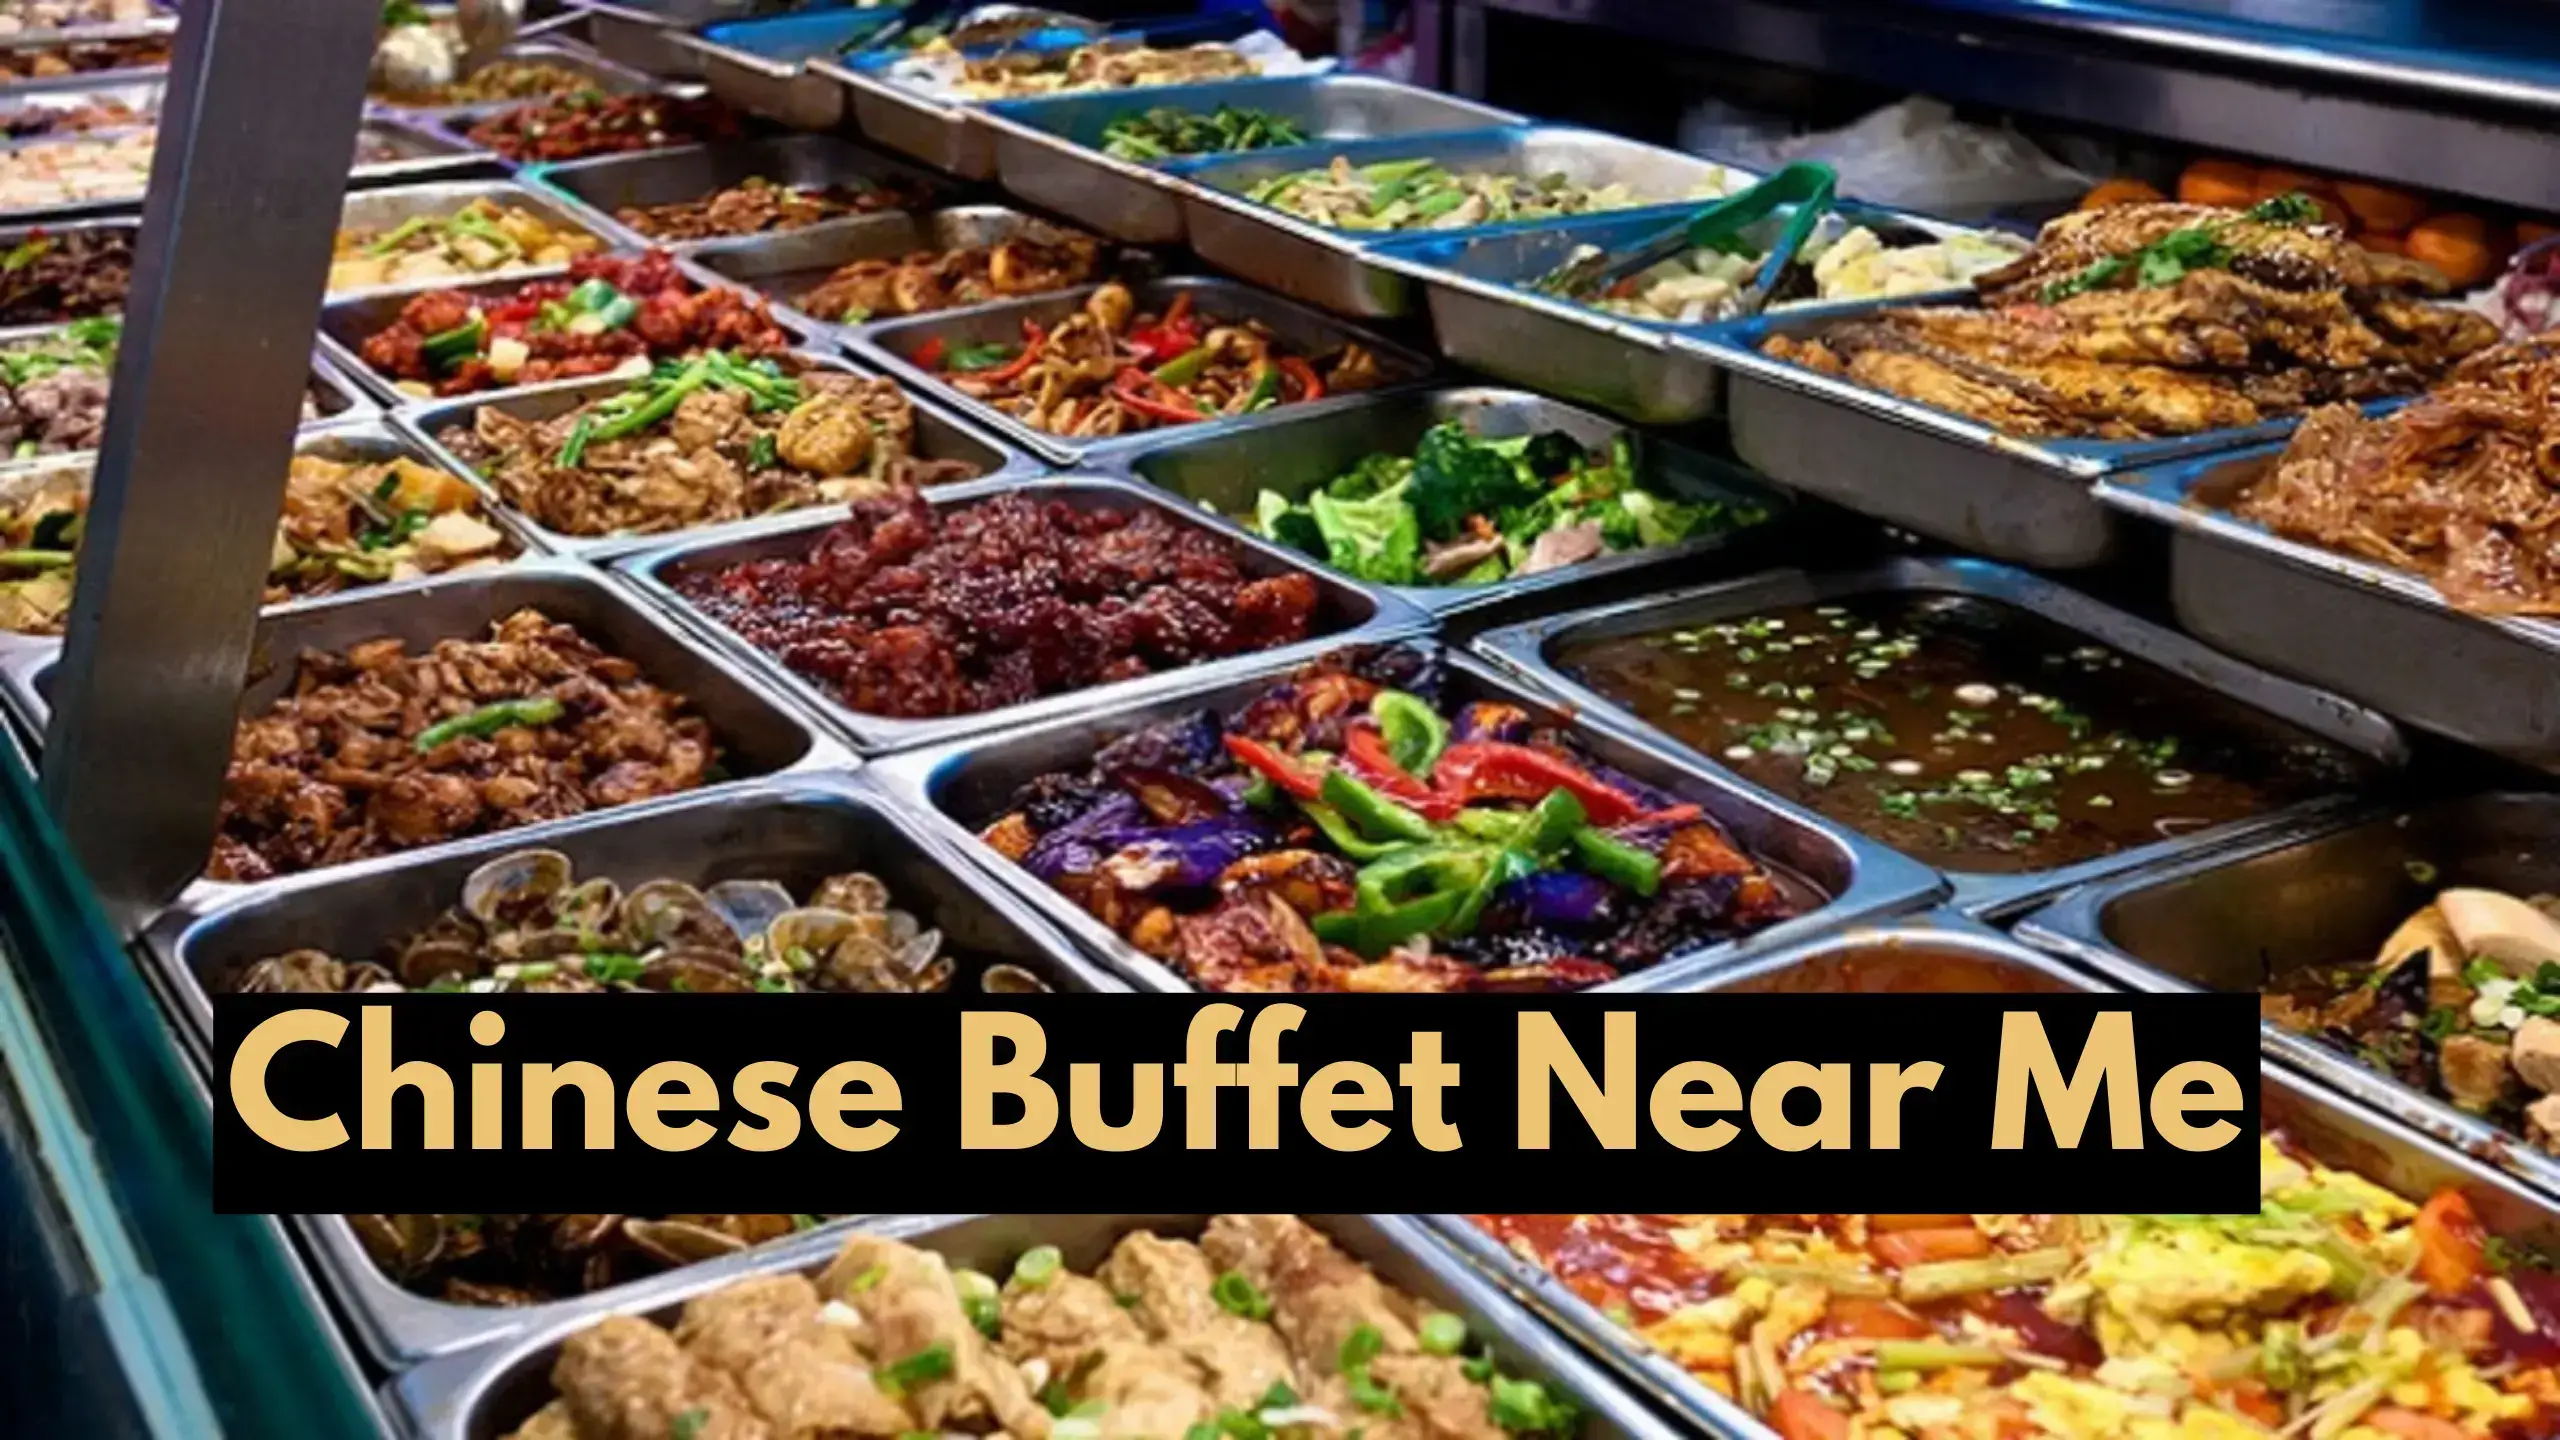 Find The Best Chinese Buffet Near Me Location & Restaurants With This Guide | Also Discover The Top Recommendation For Best Chinese Buffets.